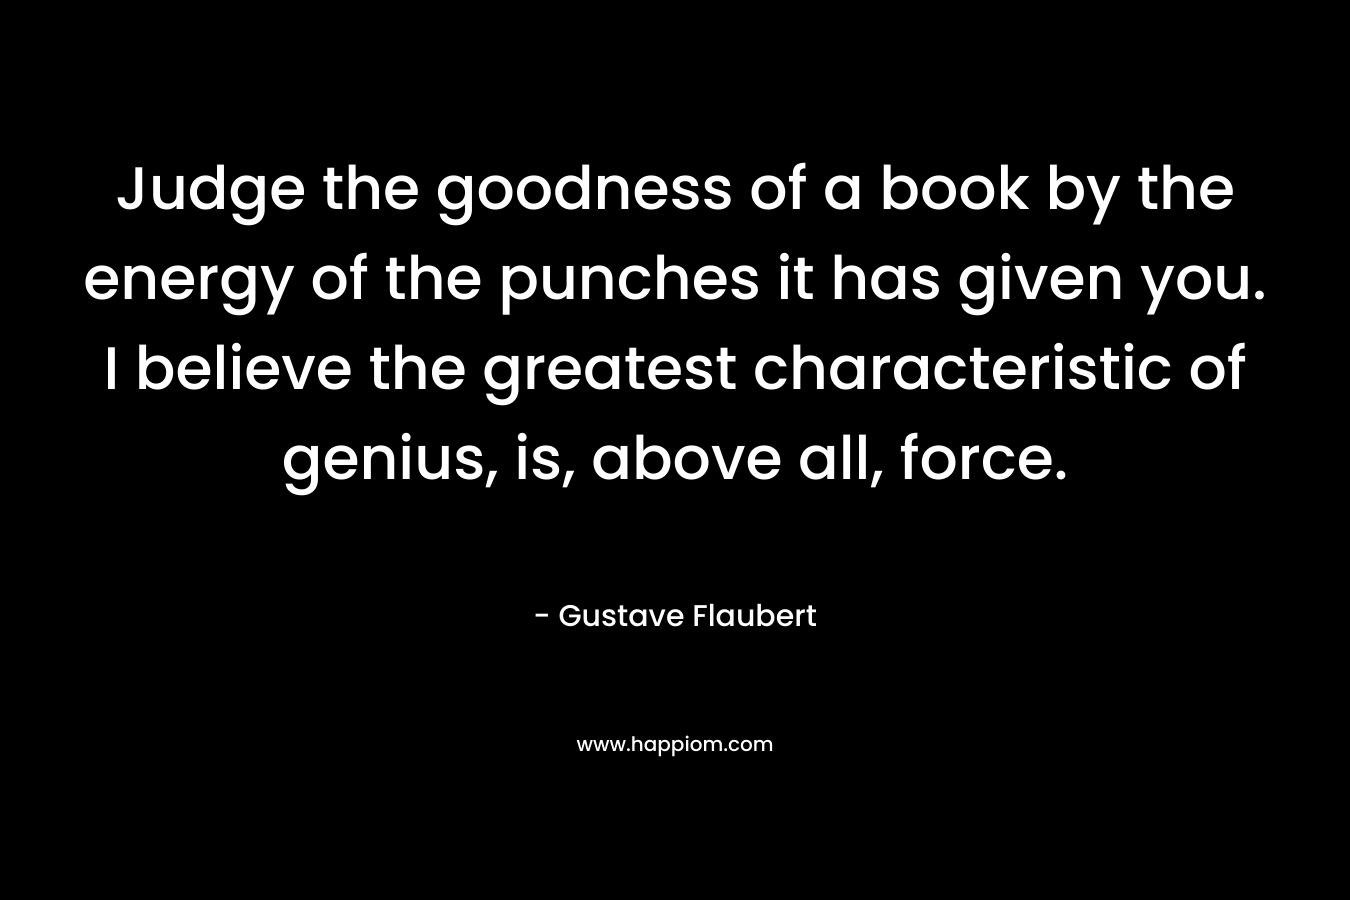 Judge the goodness of a book by the energy of the punches it has given you. I believe the greatest characteristic of genius, is, above all, force. – Gustave Flaubert